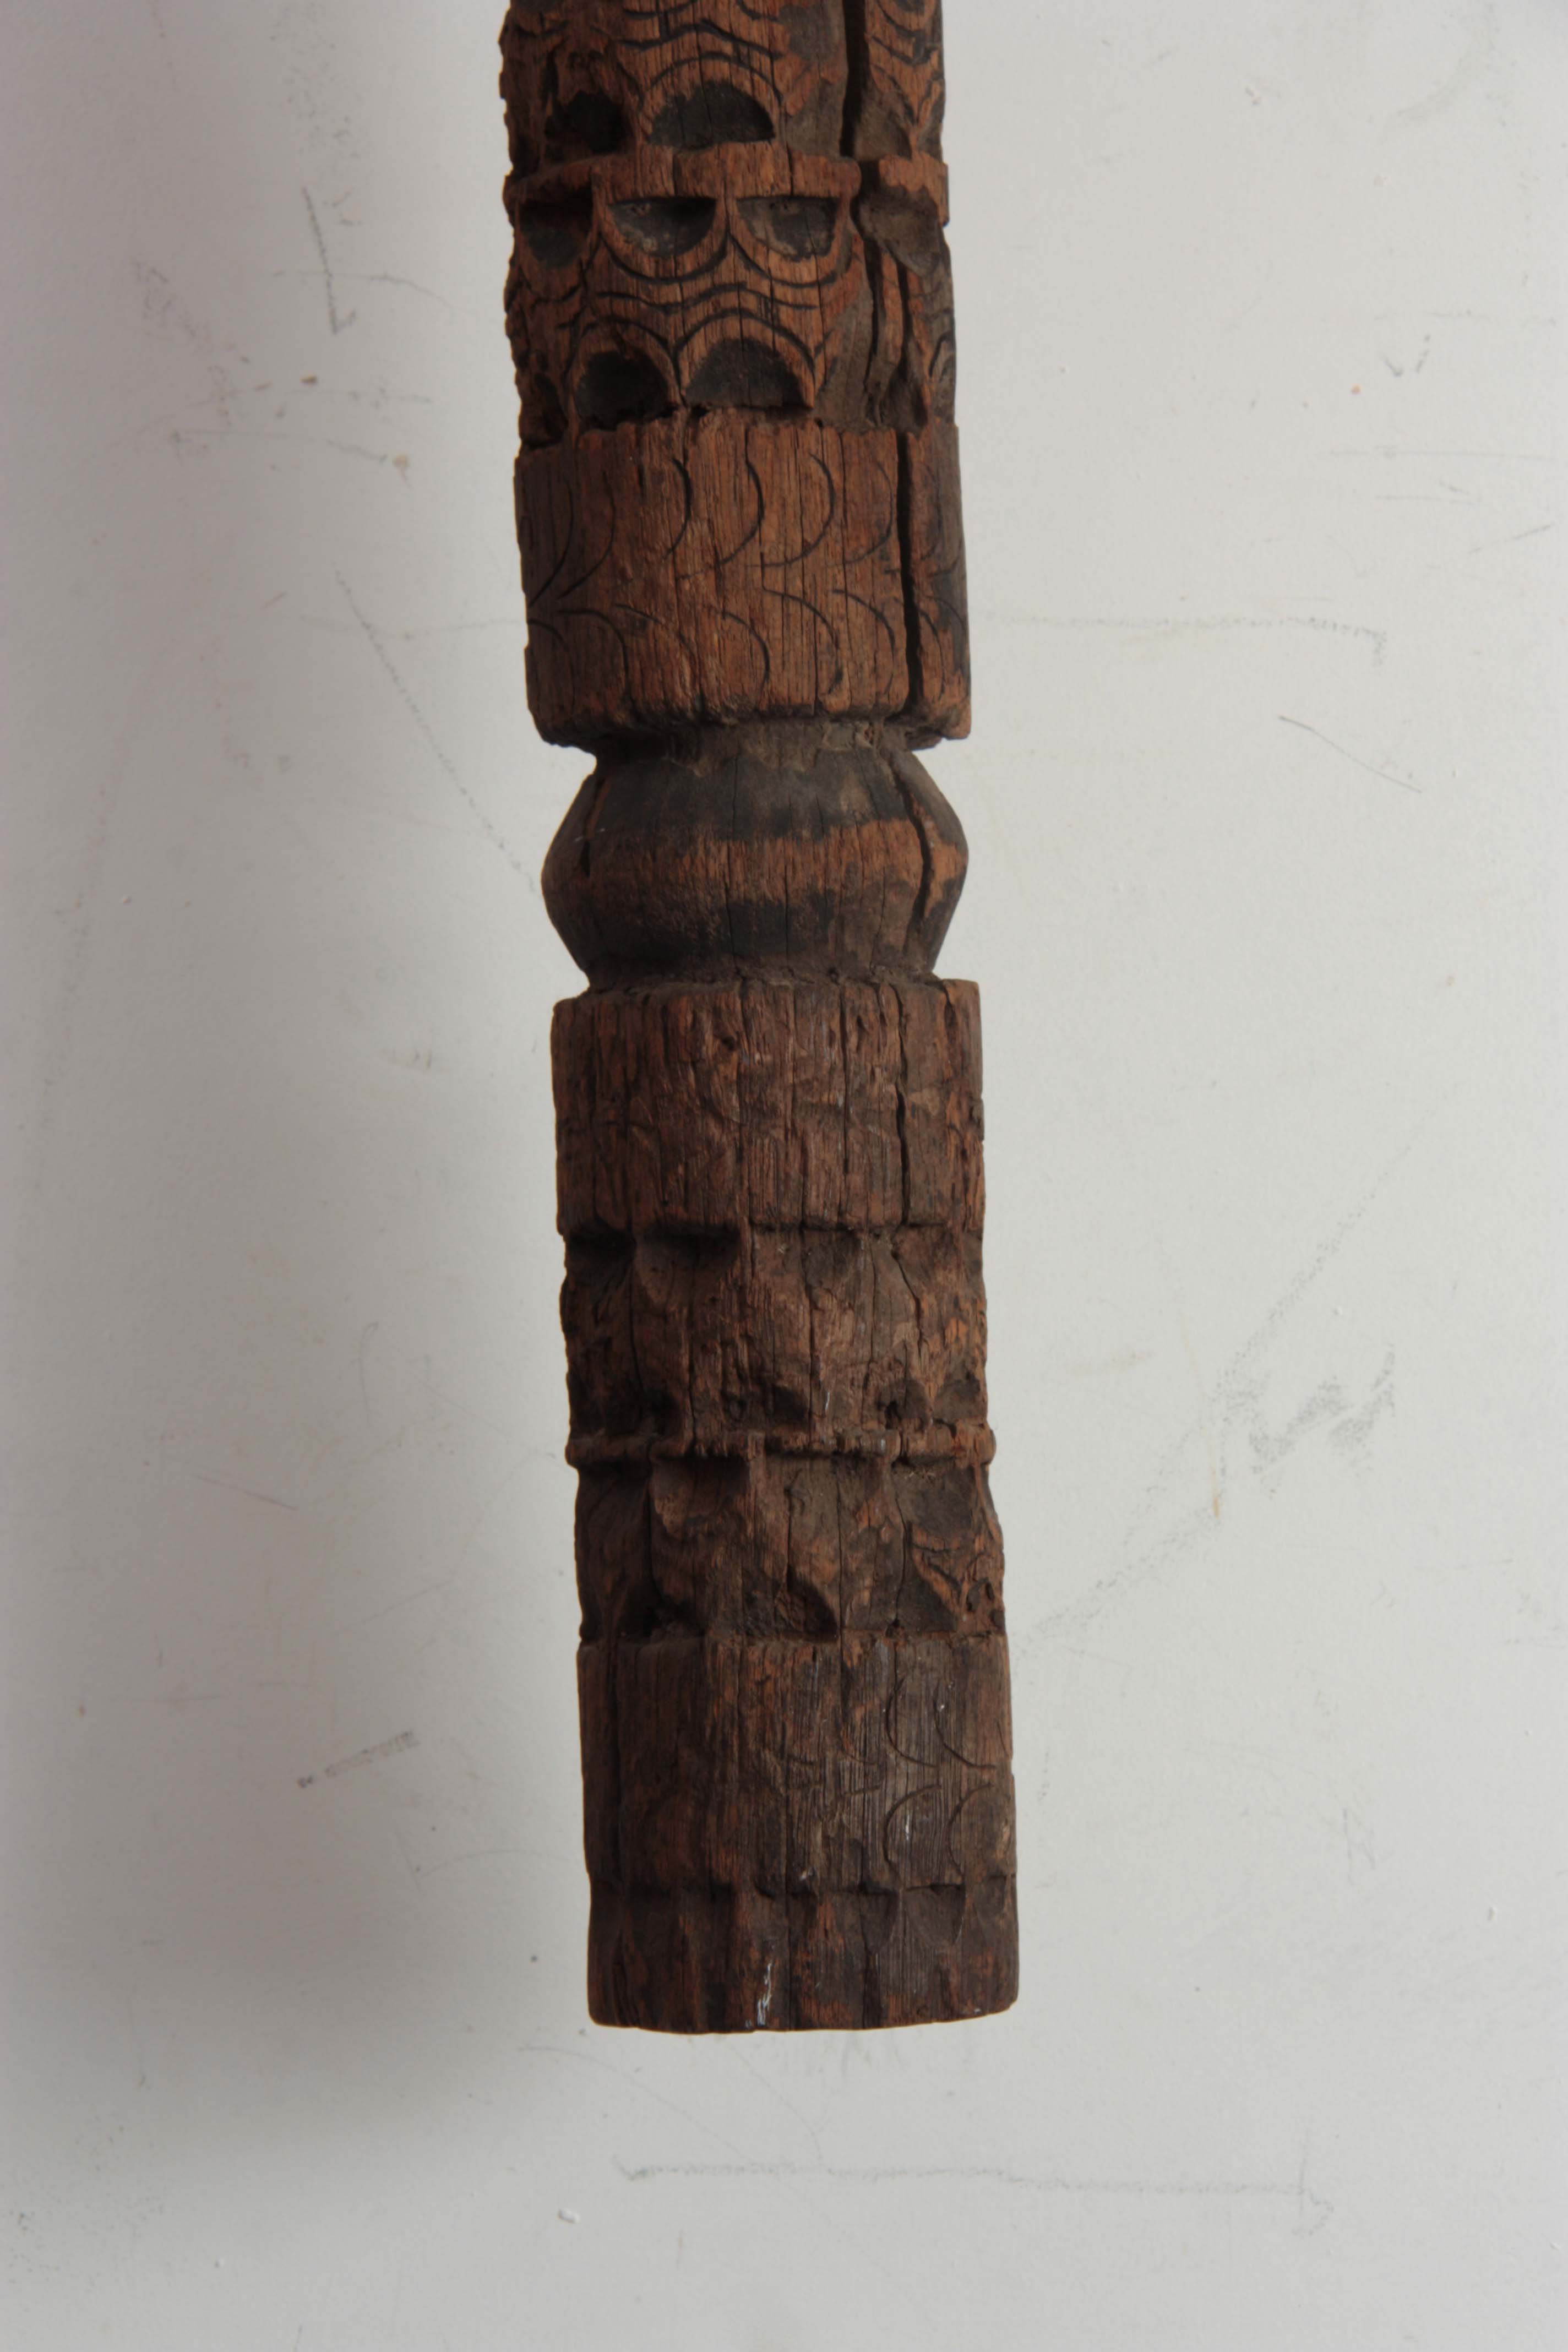 AN ETHNIC AFRICAN TRIBAL MONKEY TOTEM POLE the totem carved out of a single piece of hardwood - Image 3 of 5